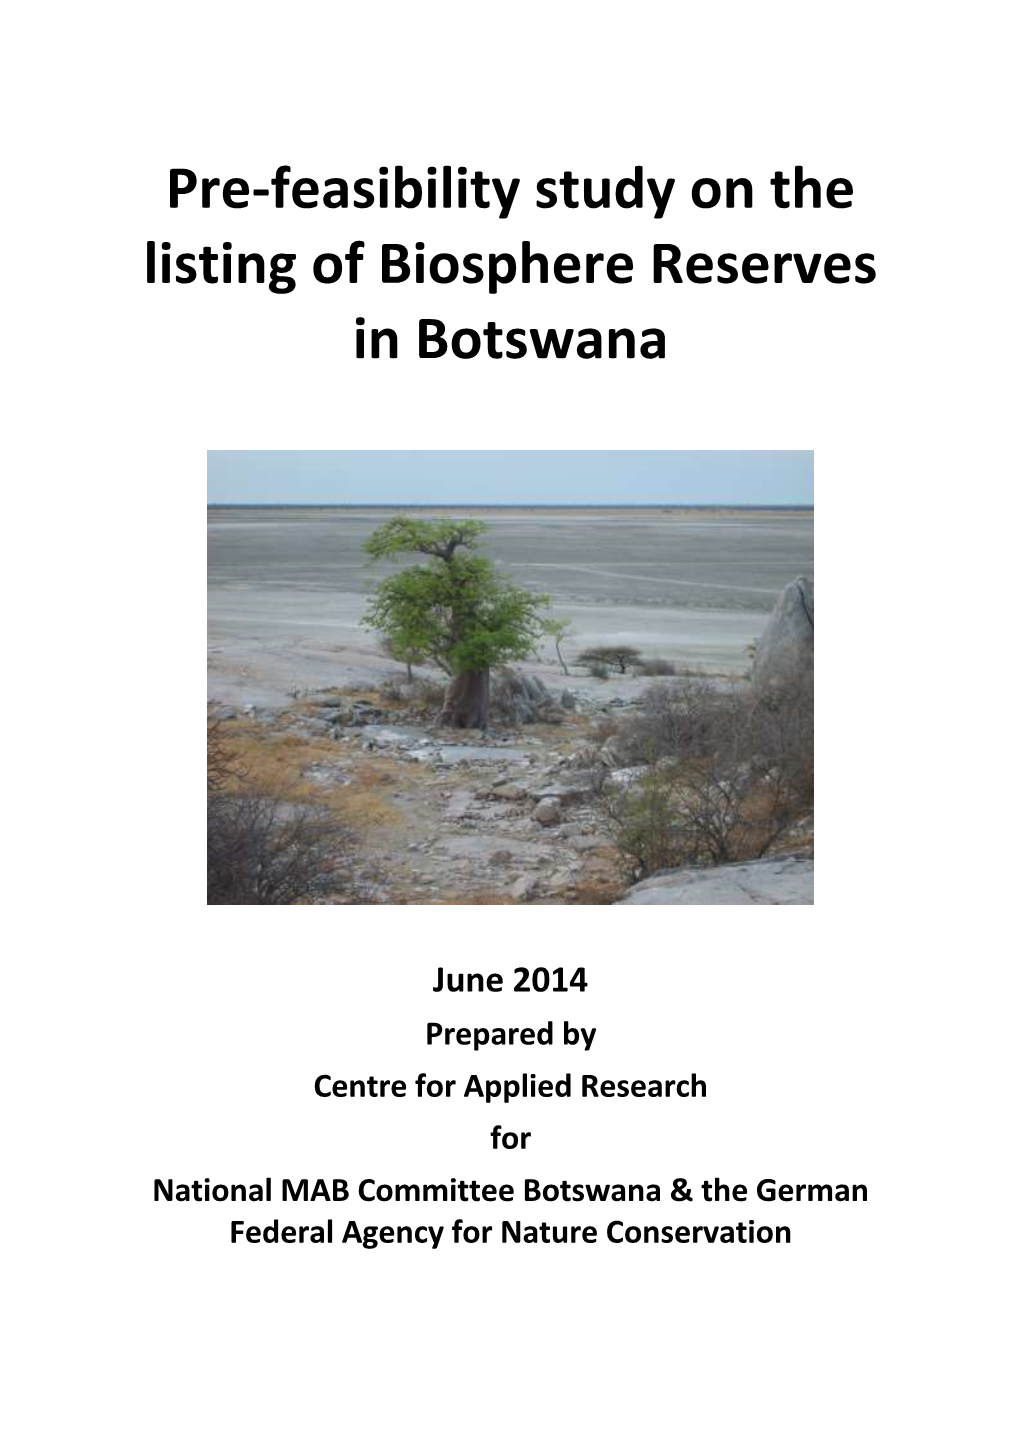 Pre-Feasibility Study on the Listing of Biosphere Reserves in Botswana